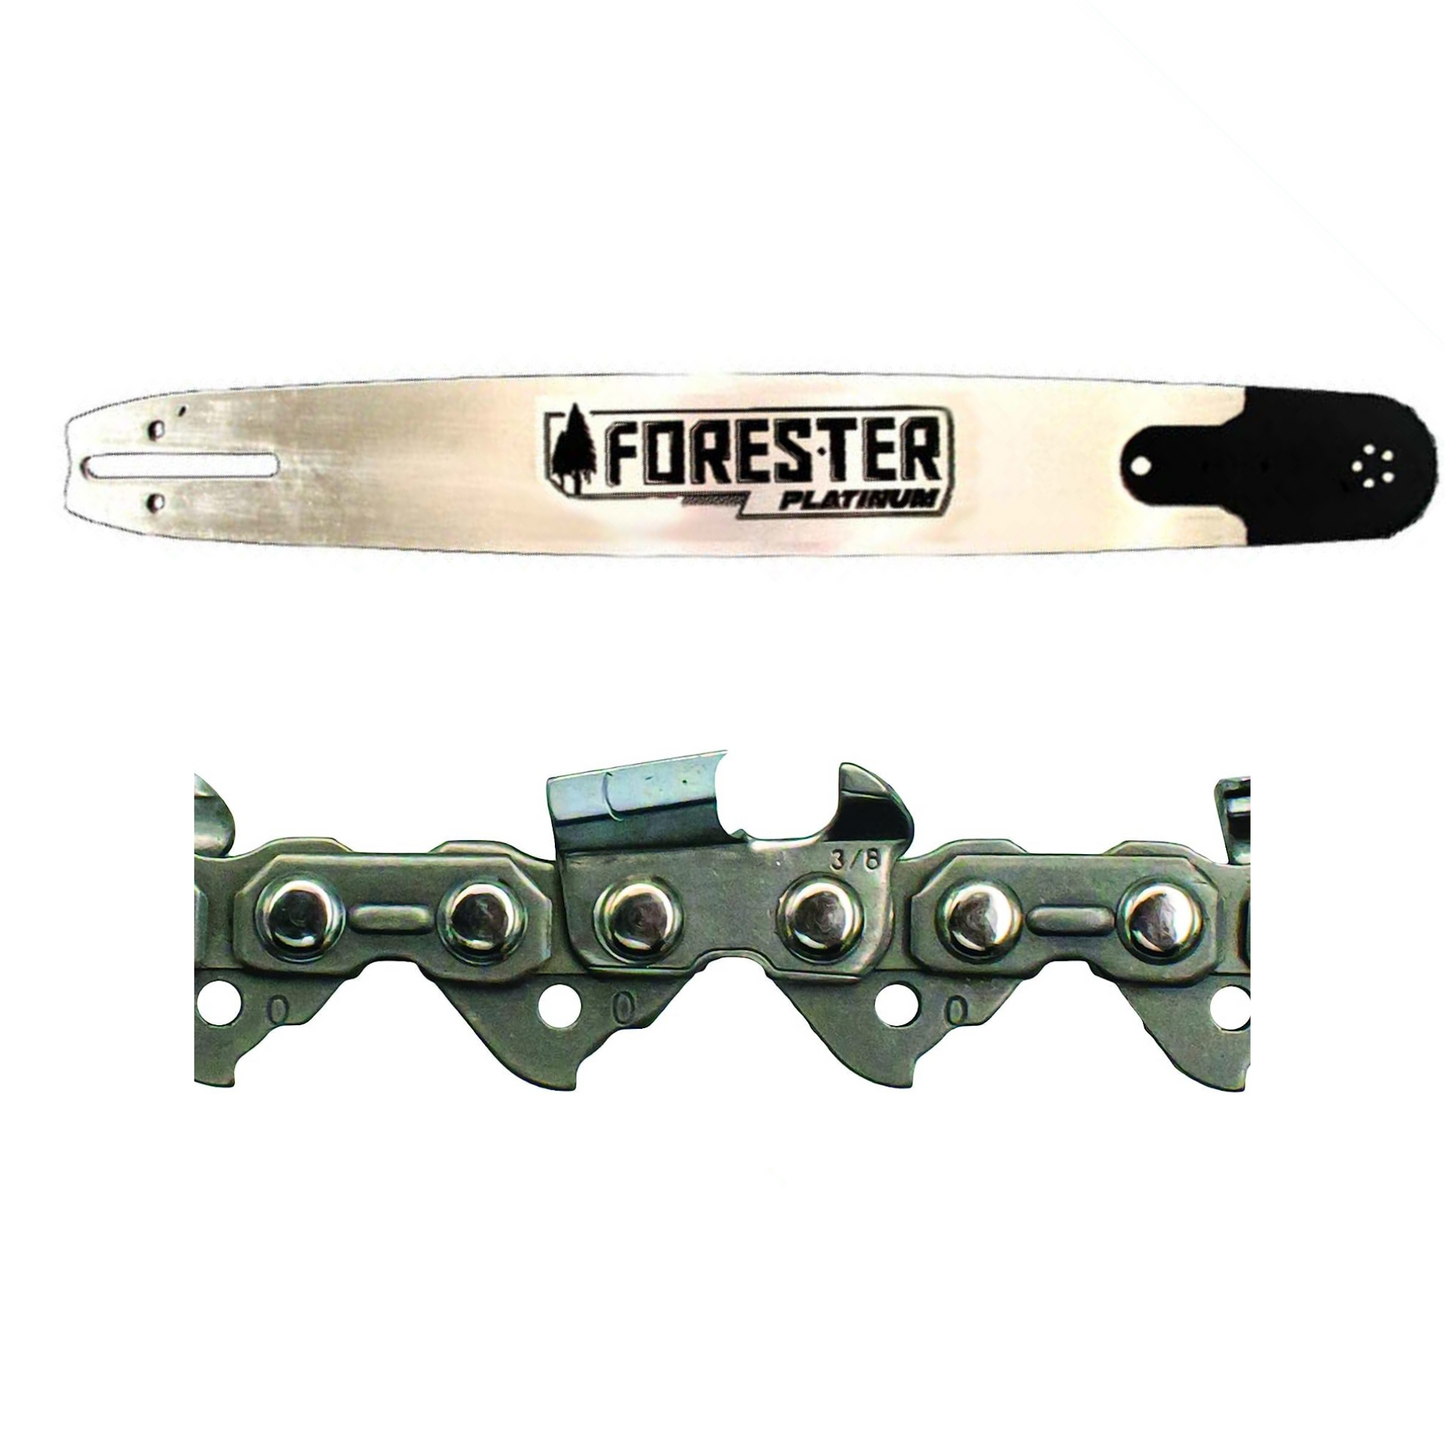 Forester Platinum Chainsaw Bar & Chain Combo - 3/8" Pitch, .050" Gauge, D009 Mount - Replacement For Husqvarna